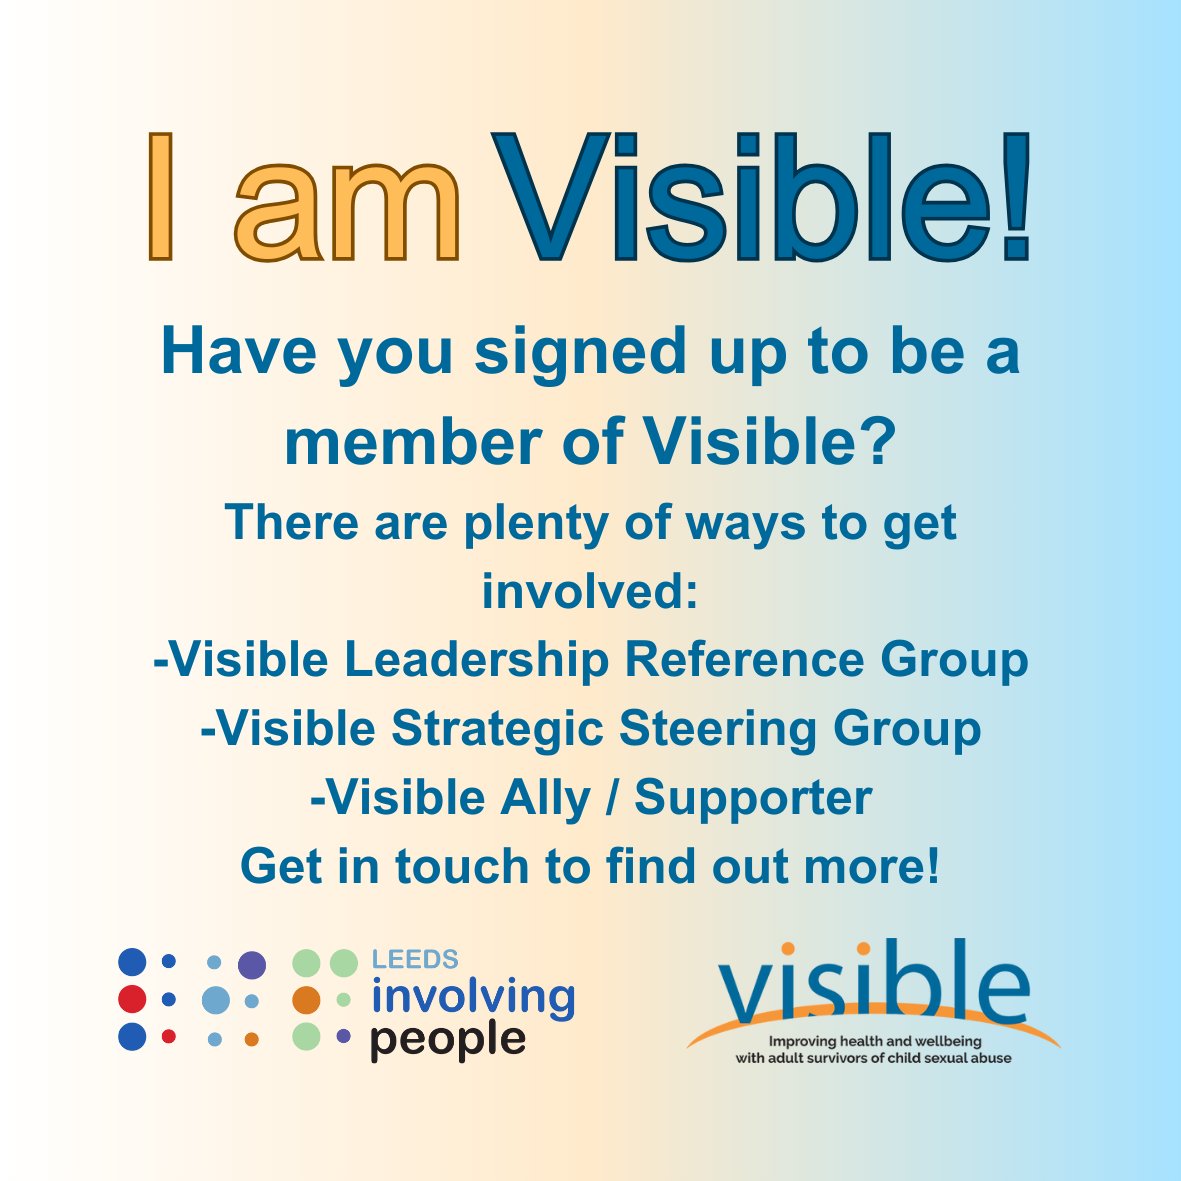 Have you signed up to our mailing list? Sign up here: surveymonkey.com/r/5JZ3H5F #relaunch #csa #childsexualabuse #survivors #wearevisible #makingVisibleVISIBLE #wearehere